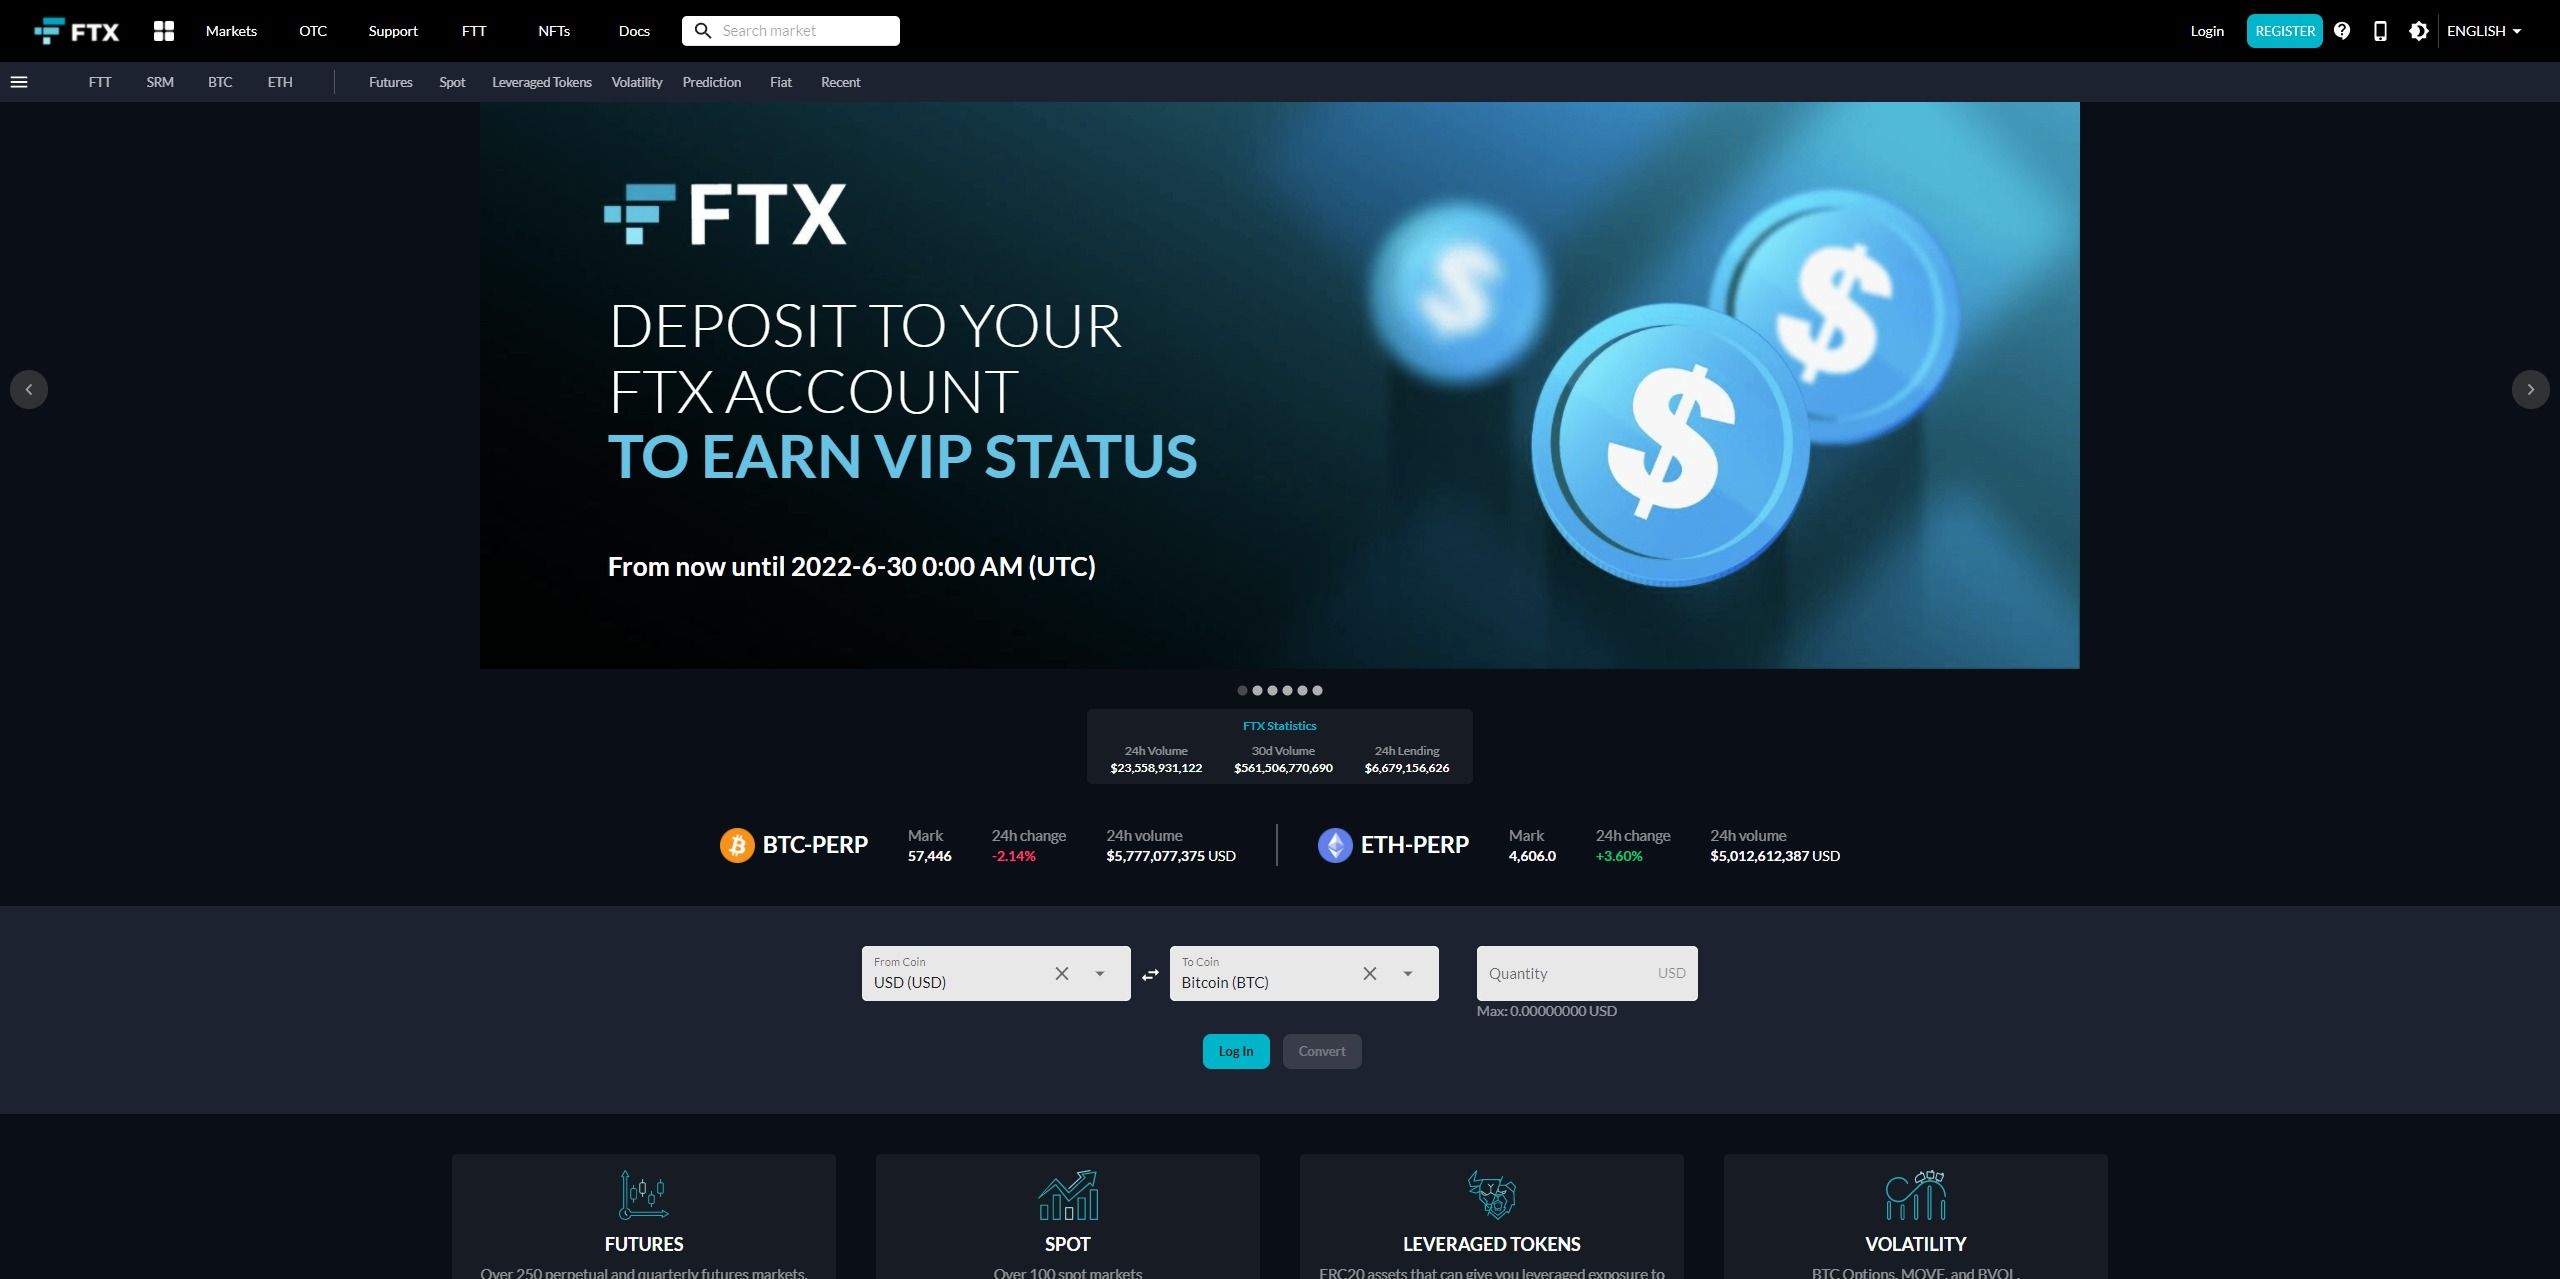 Screenshot of FTX's home page